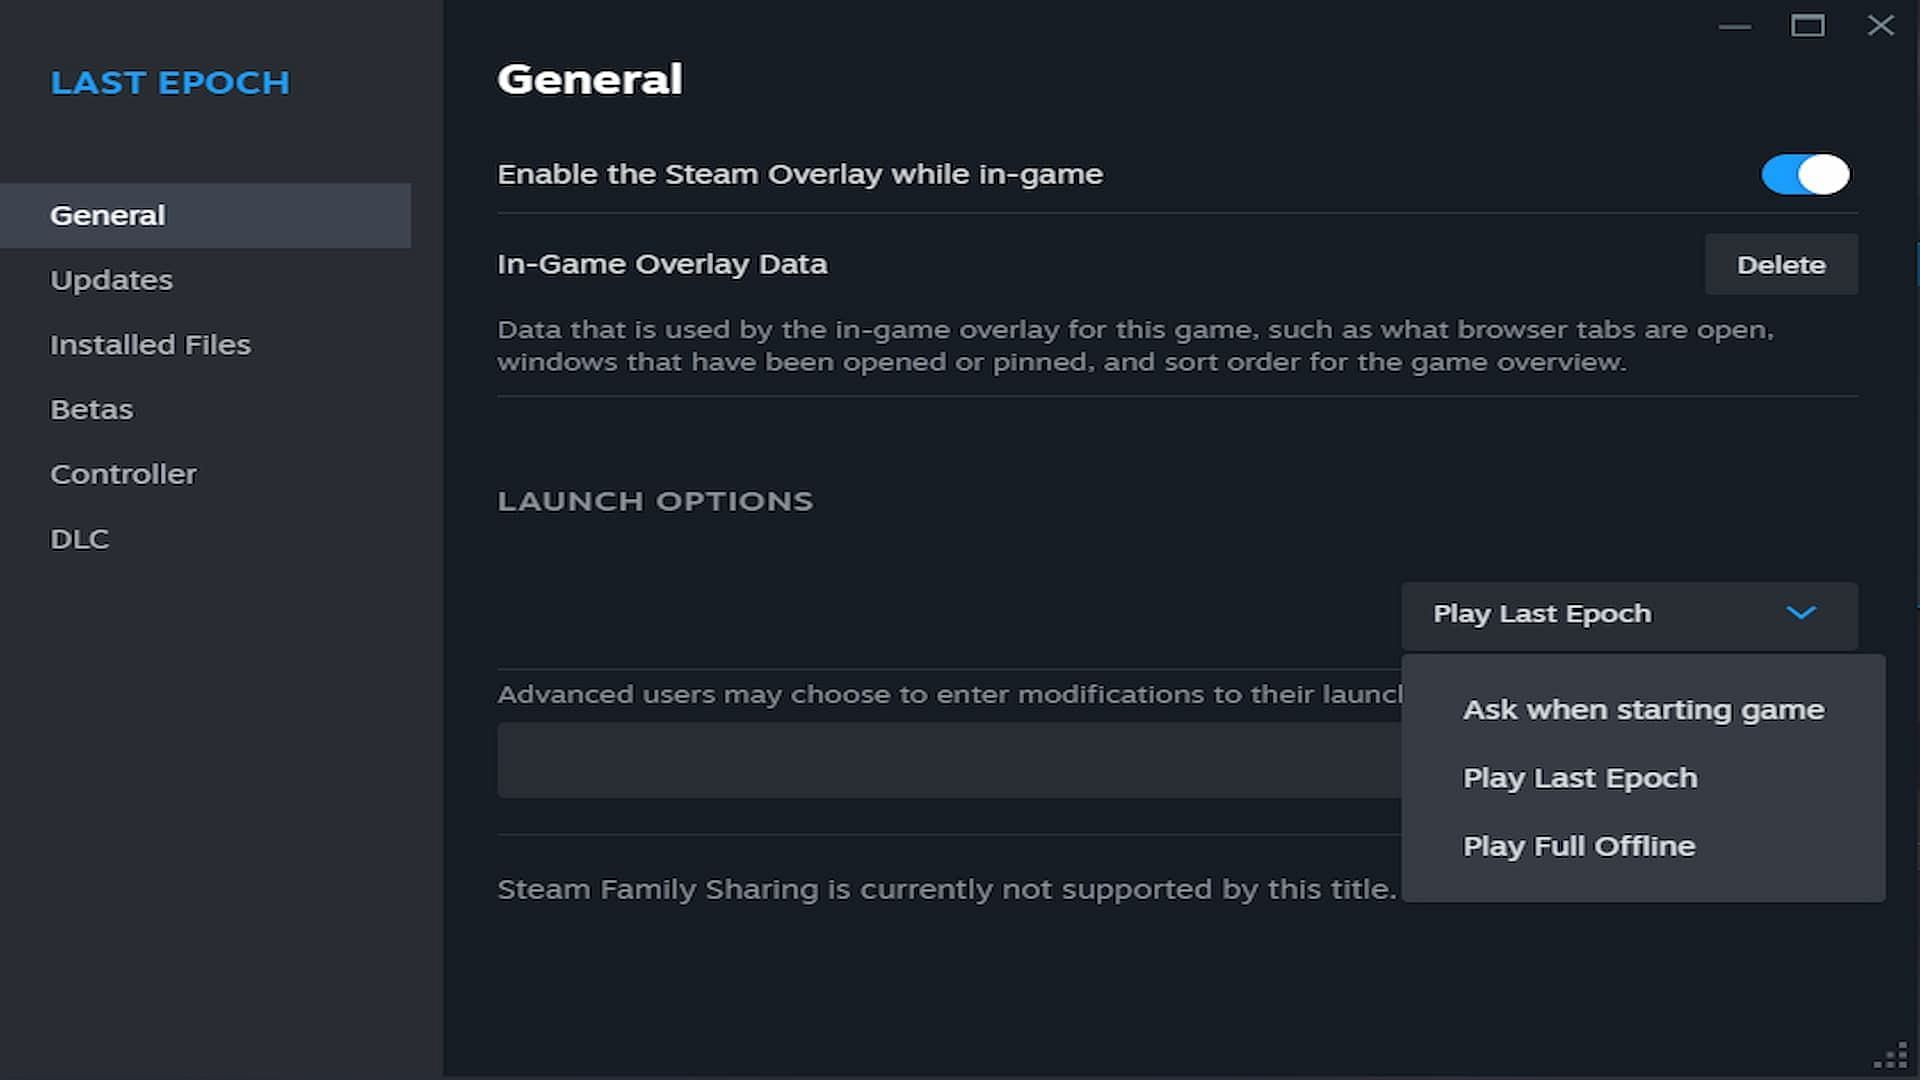 Players can enable the Full Offline Mode via Steam (Image via Eleventh Hour Games)